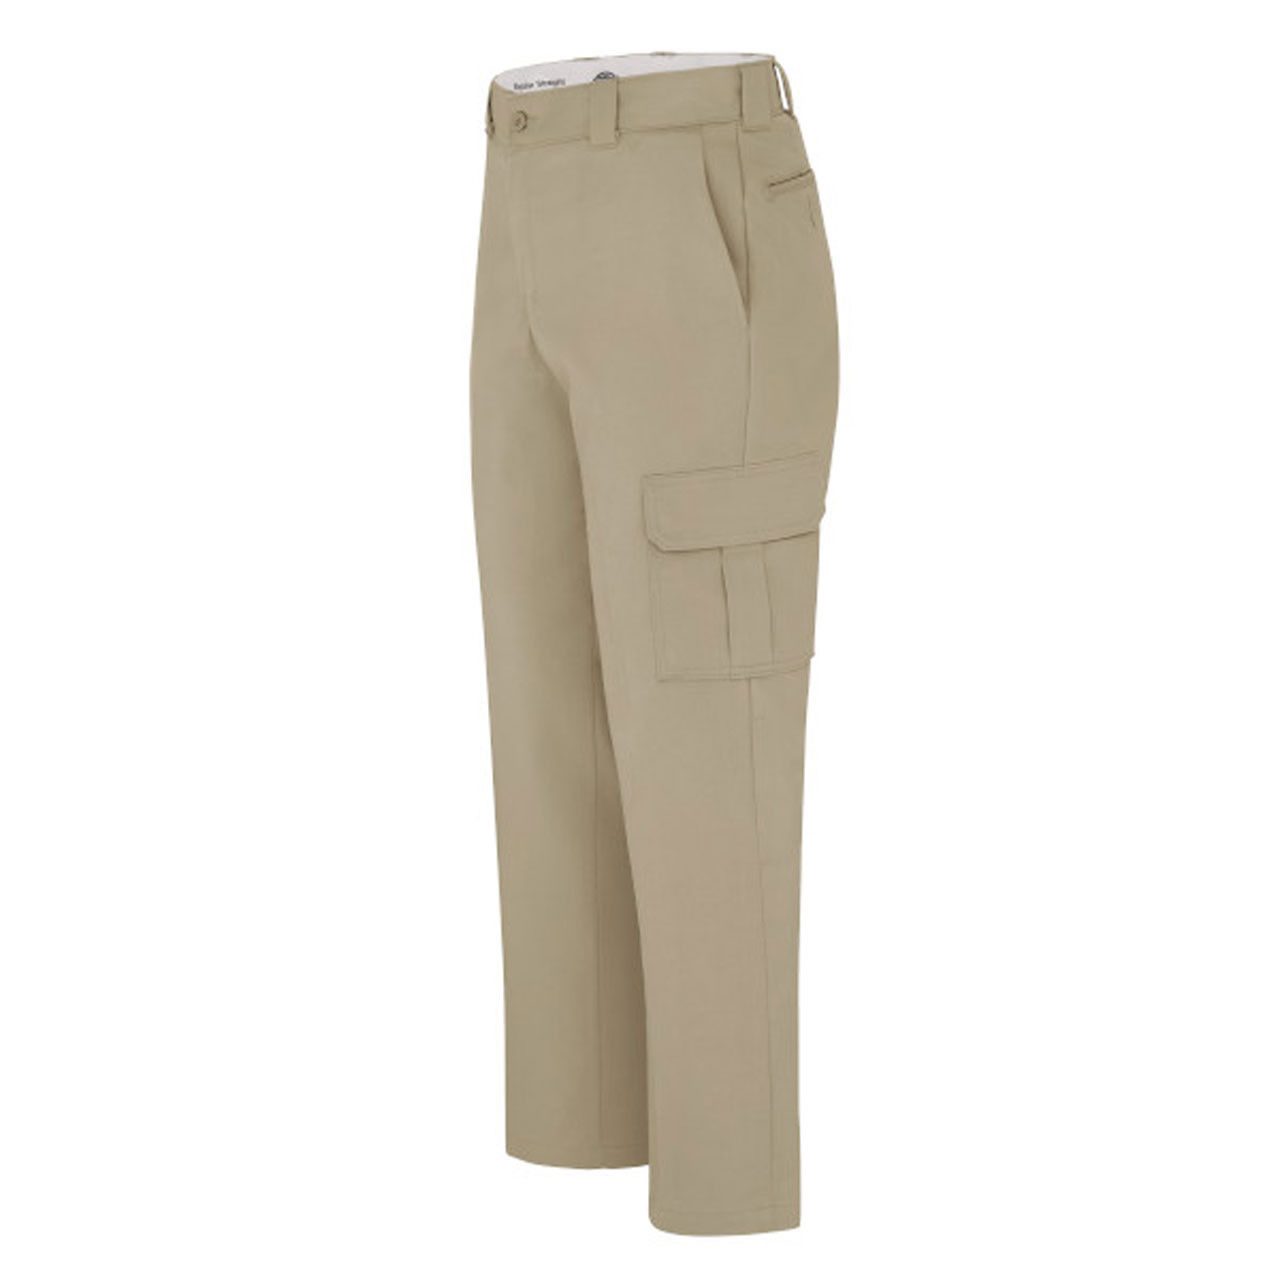 Can I carry essentials in Dickies insulated pants?